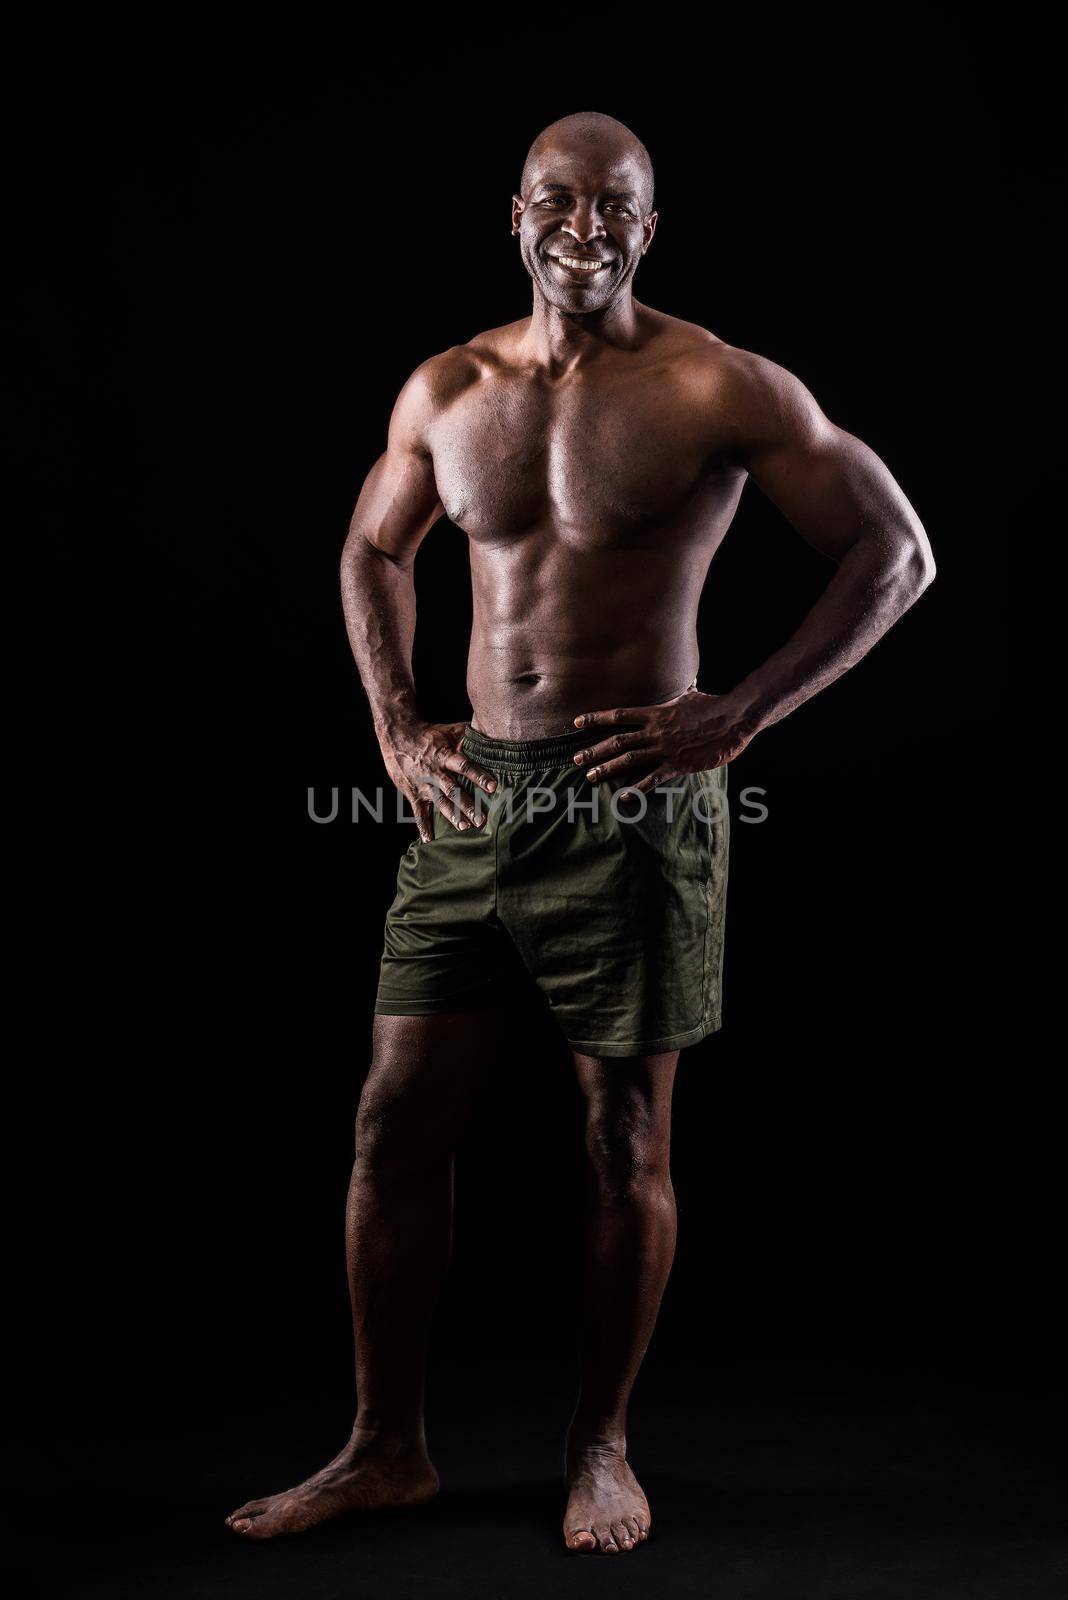 Cheerful adult muscular man standing looking at camera with hands on waist. African American adult male standing dressed only in shorts on a black background.